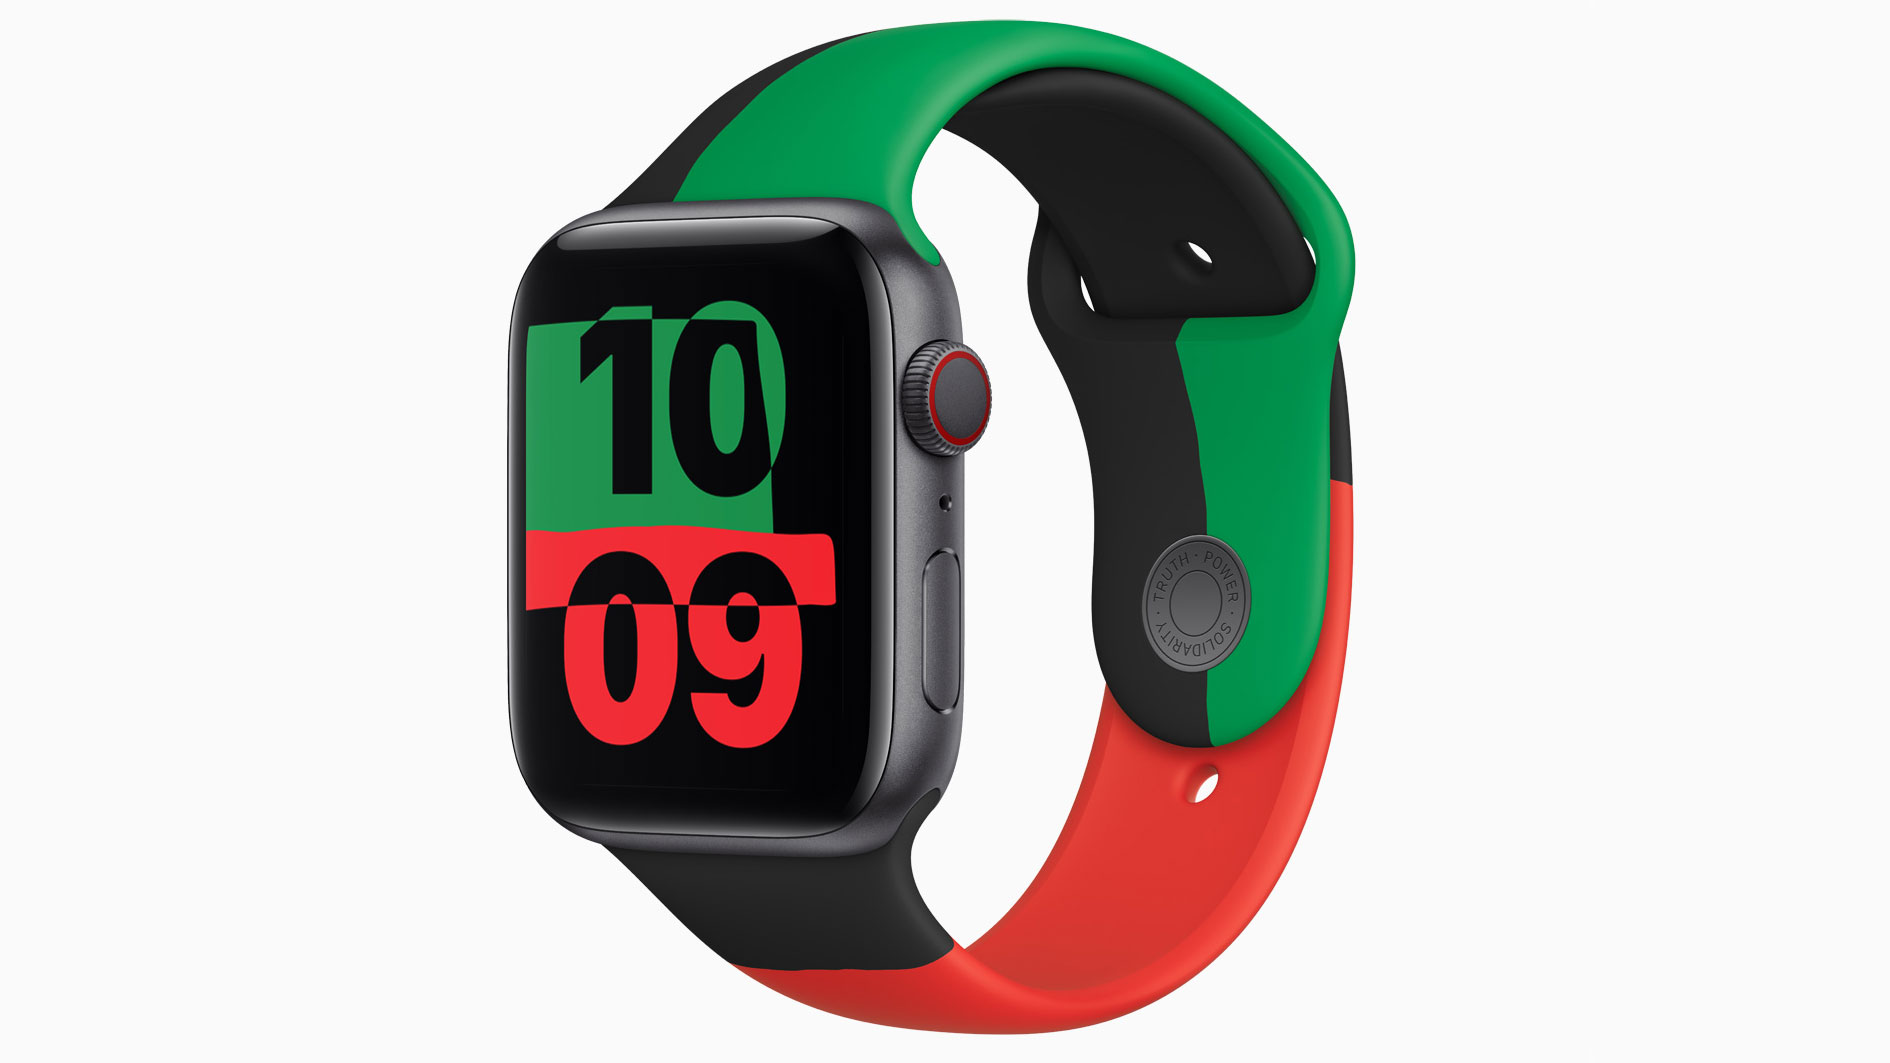 Apple Unity Watch and Watch Faces